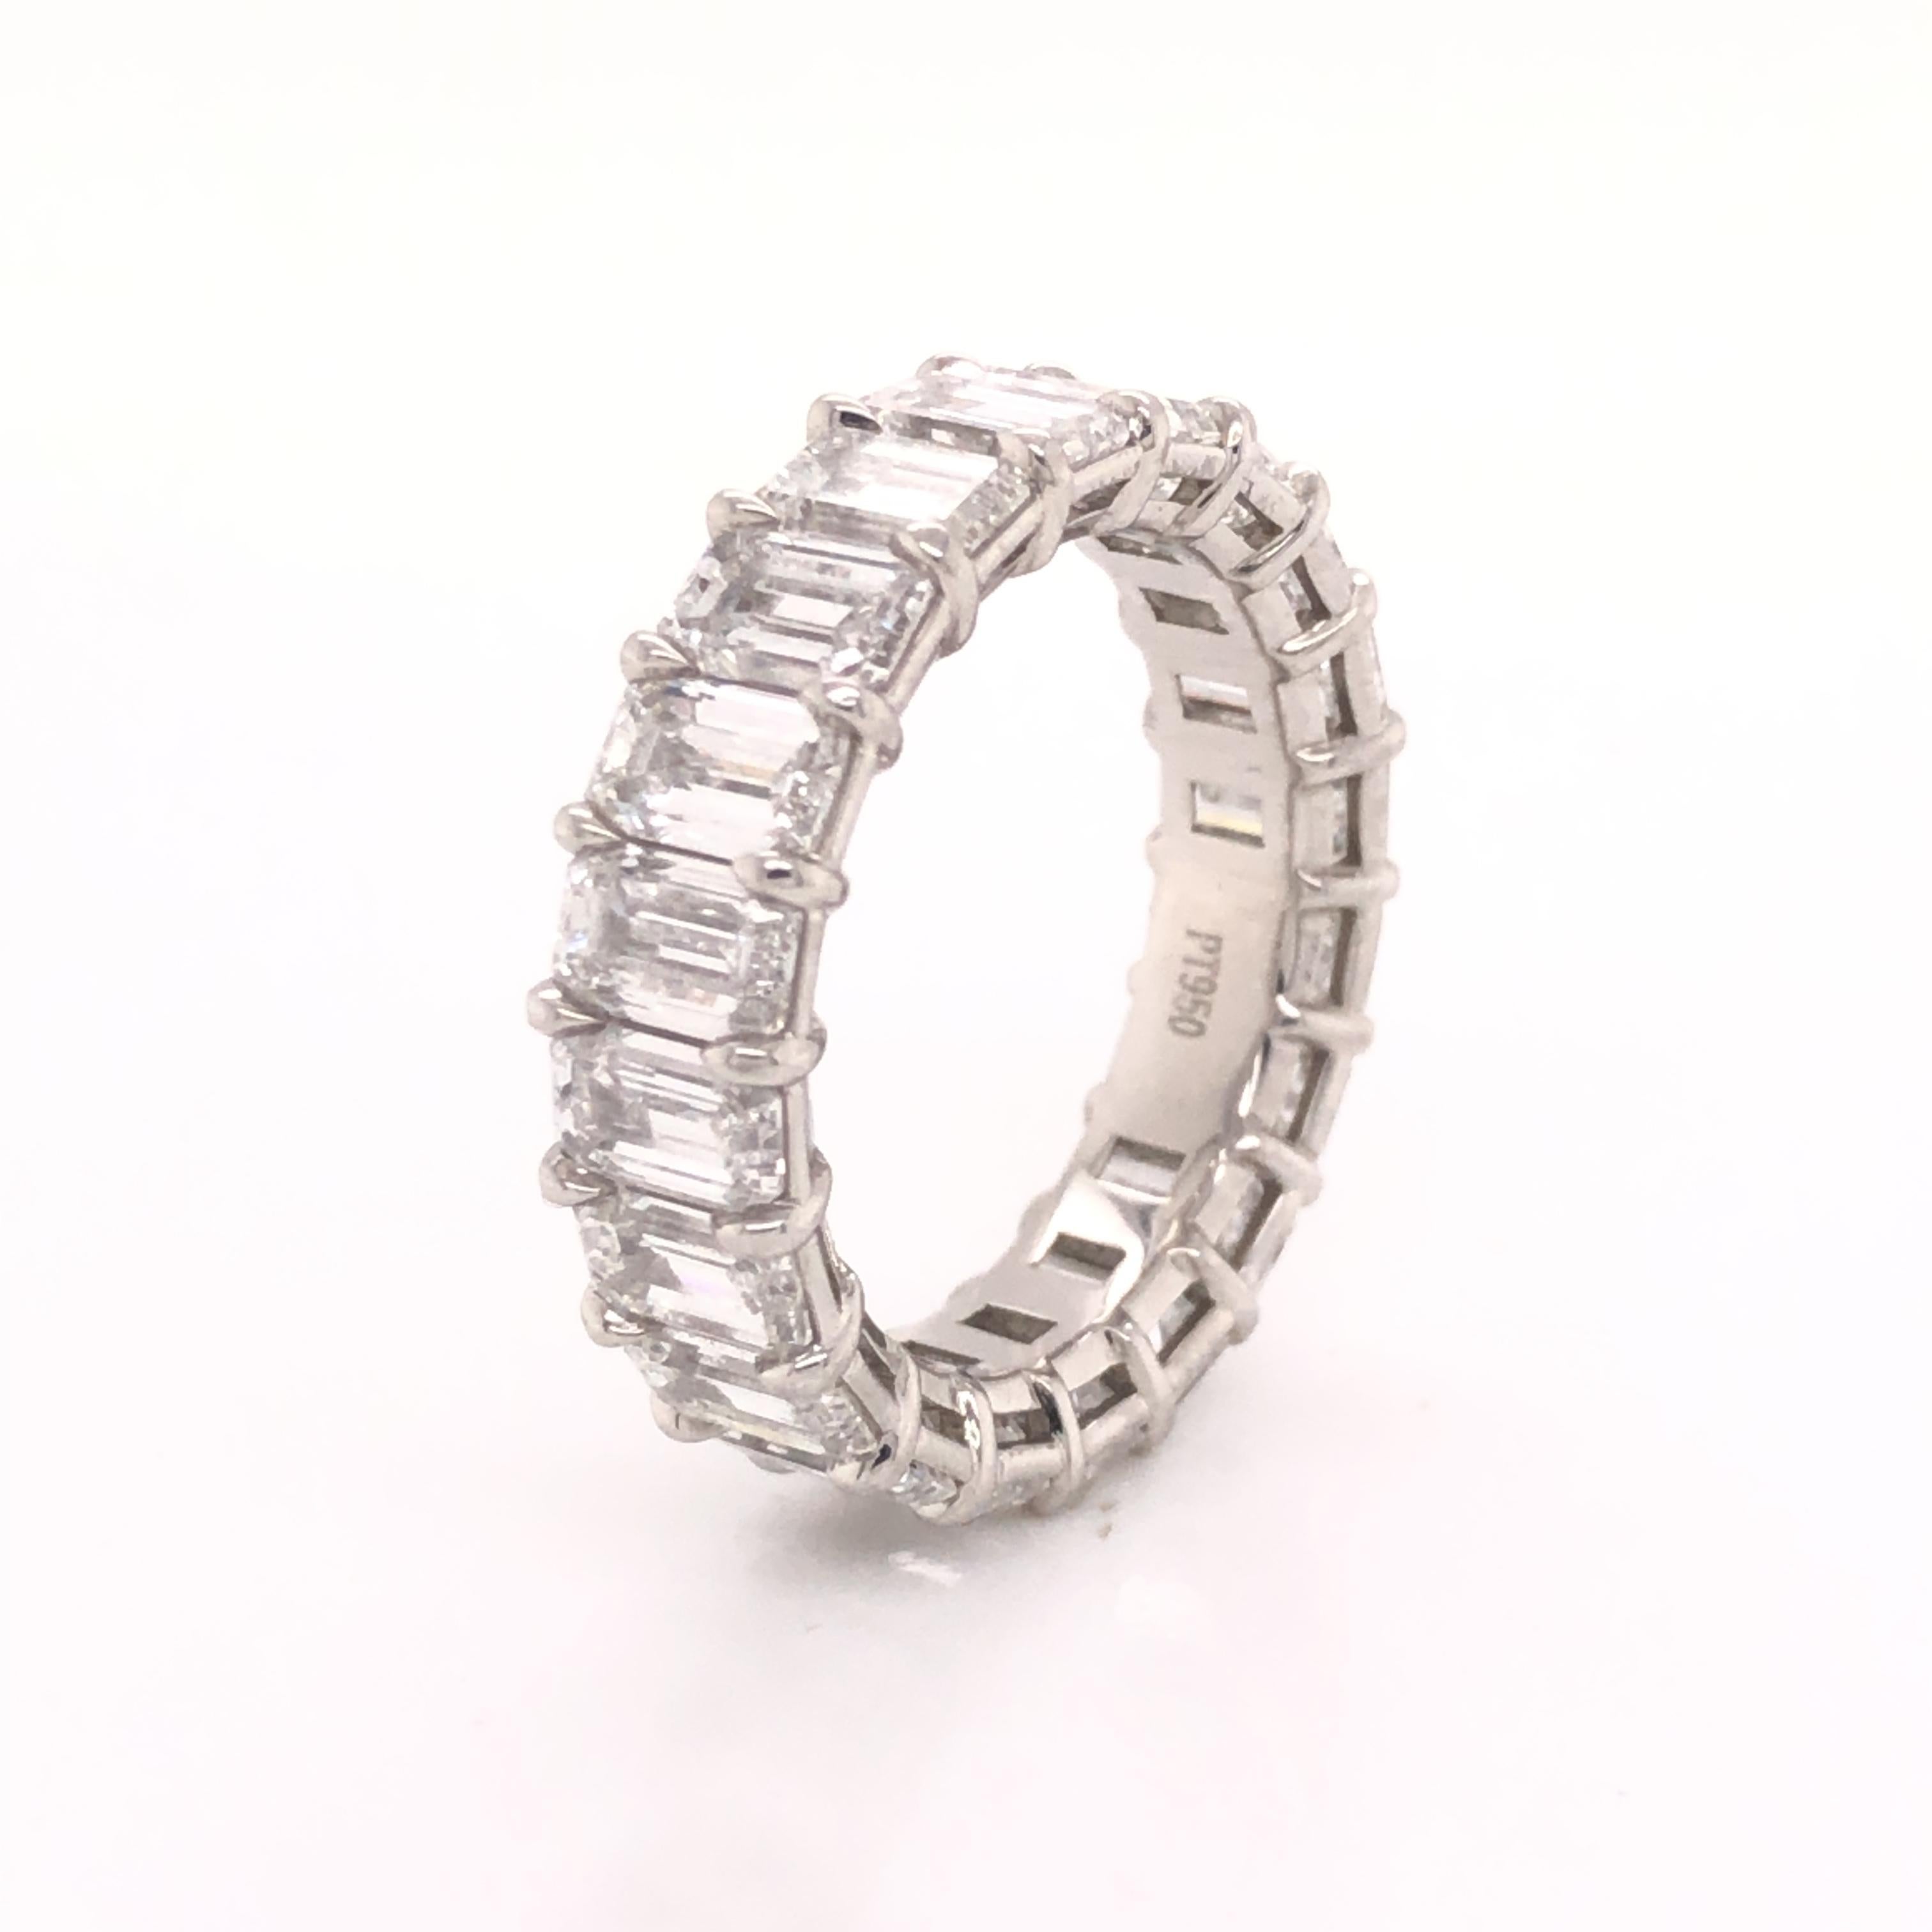 Amazing eternity band crafted in platinum. This gorgeous eternity band is set with emerald cut diamonds 20 in total. The ring displays a 8.05 tcw. Each diamond in this ring weigh approximately 0.40 ct, all diamonds are VVS- VS and shows F-G color.